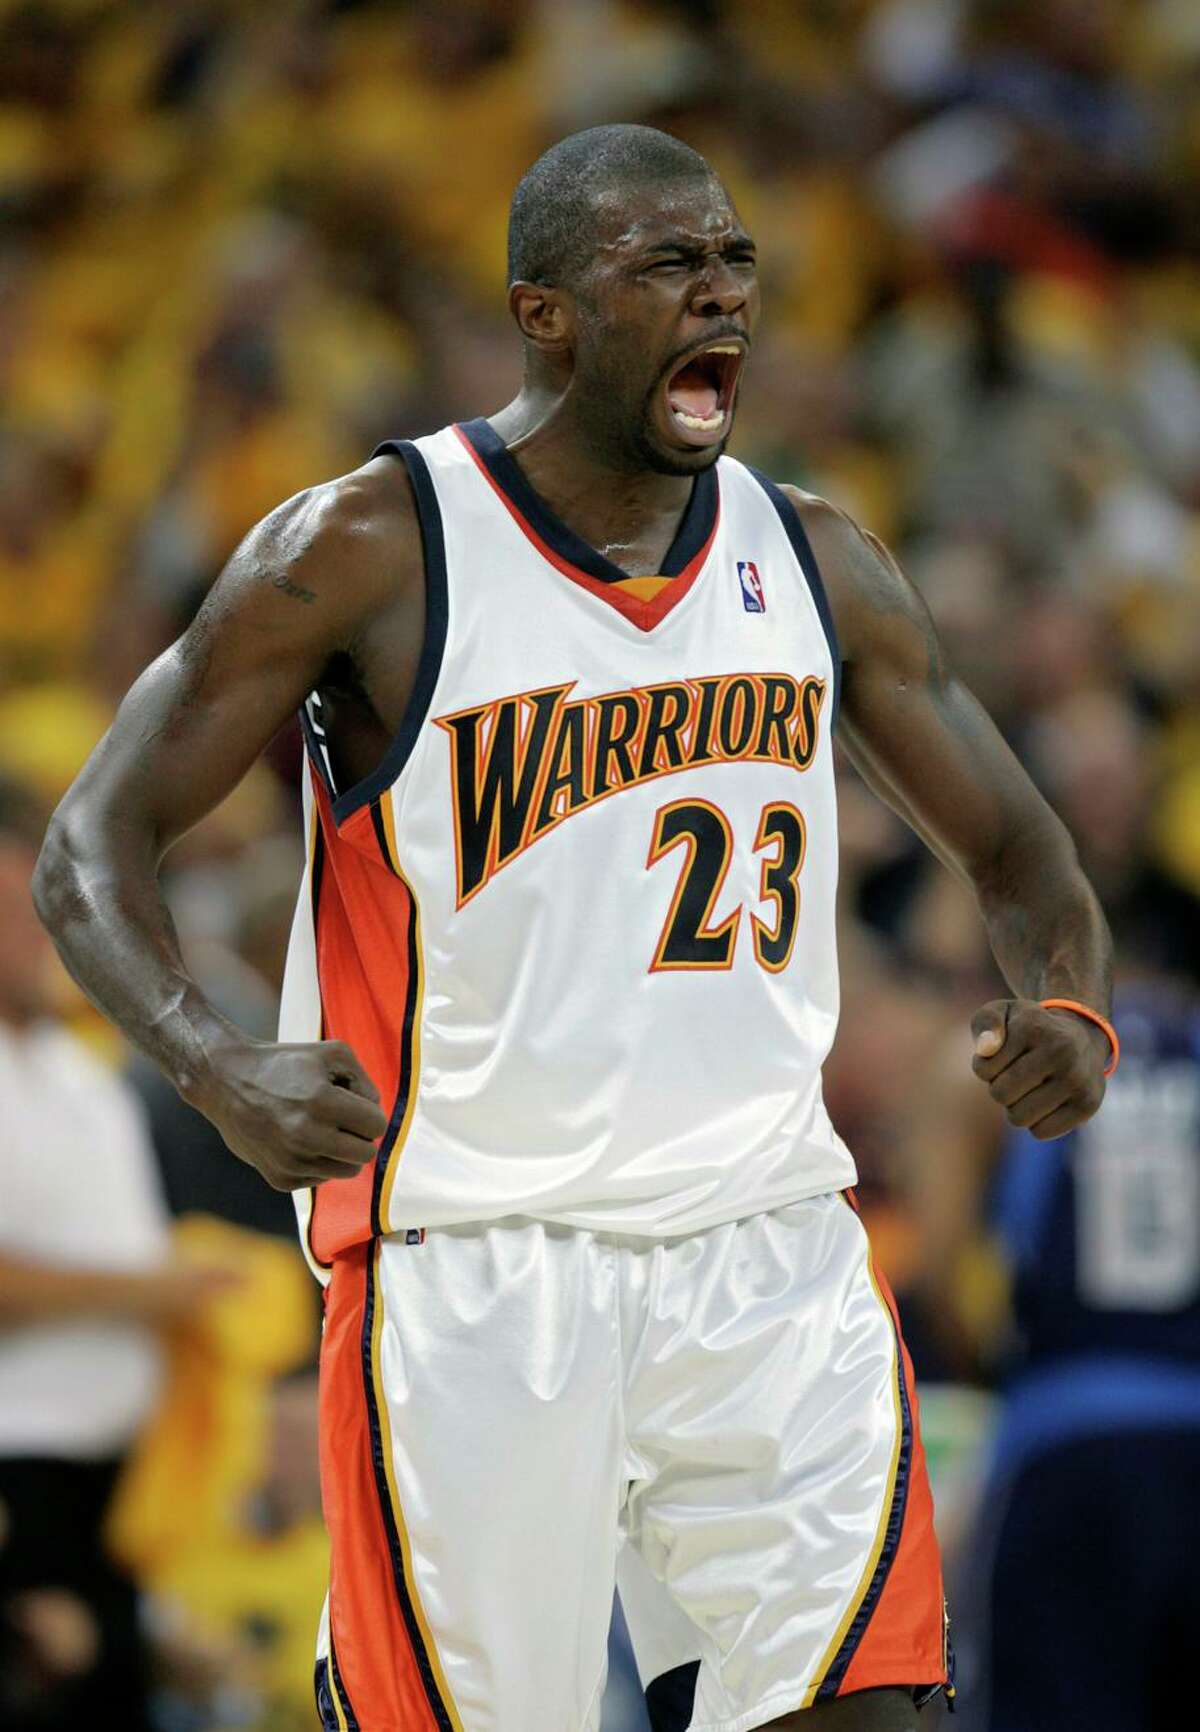 Warriors guard Jason Richardson is pumped up after hitting a three that made the score 99-75 against the Dallas Mavericks.